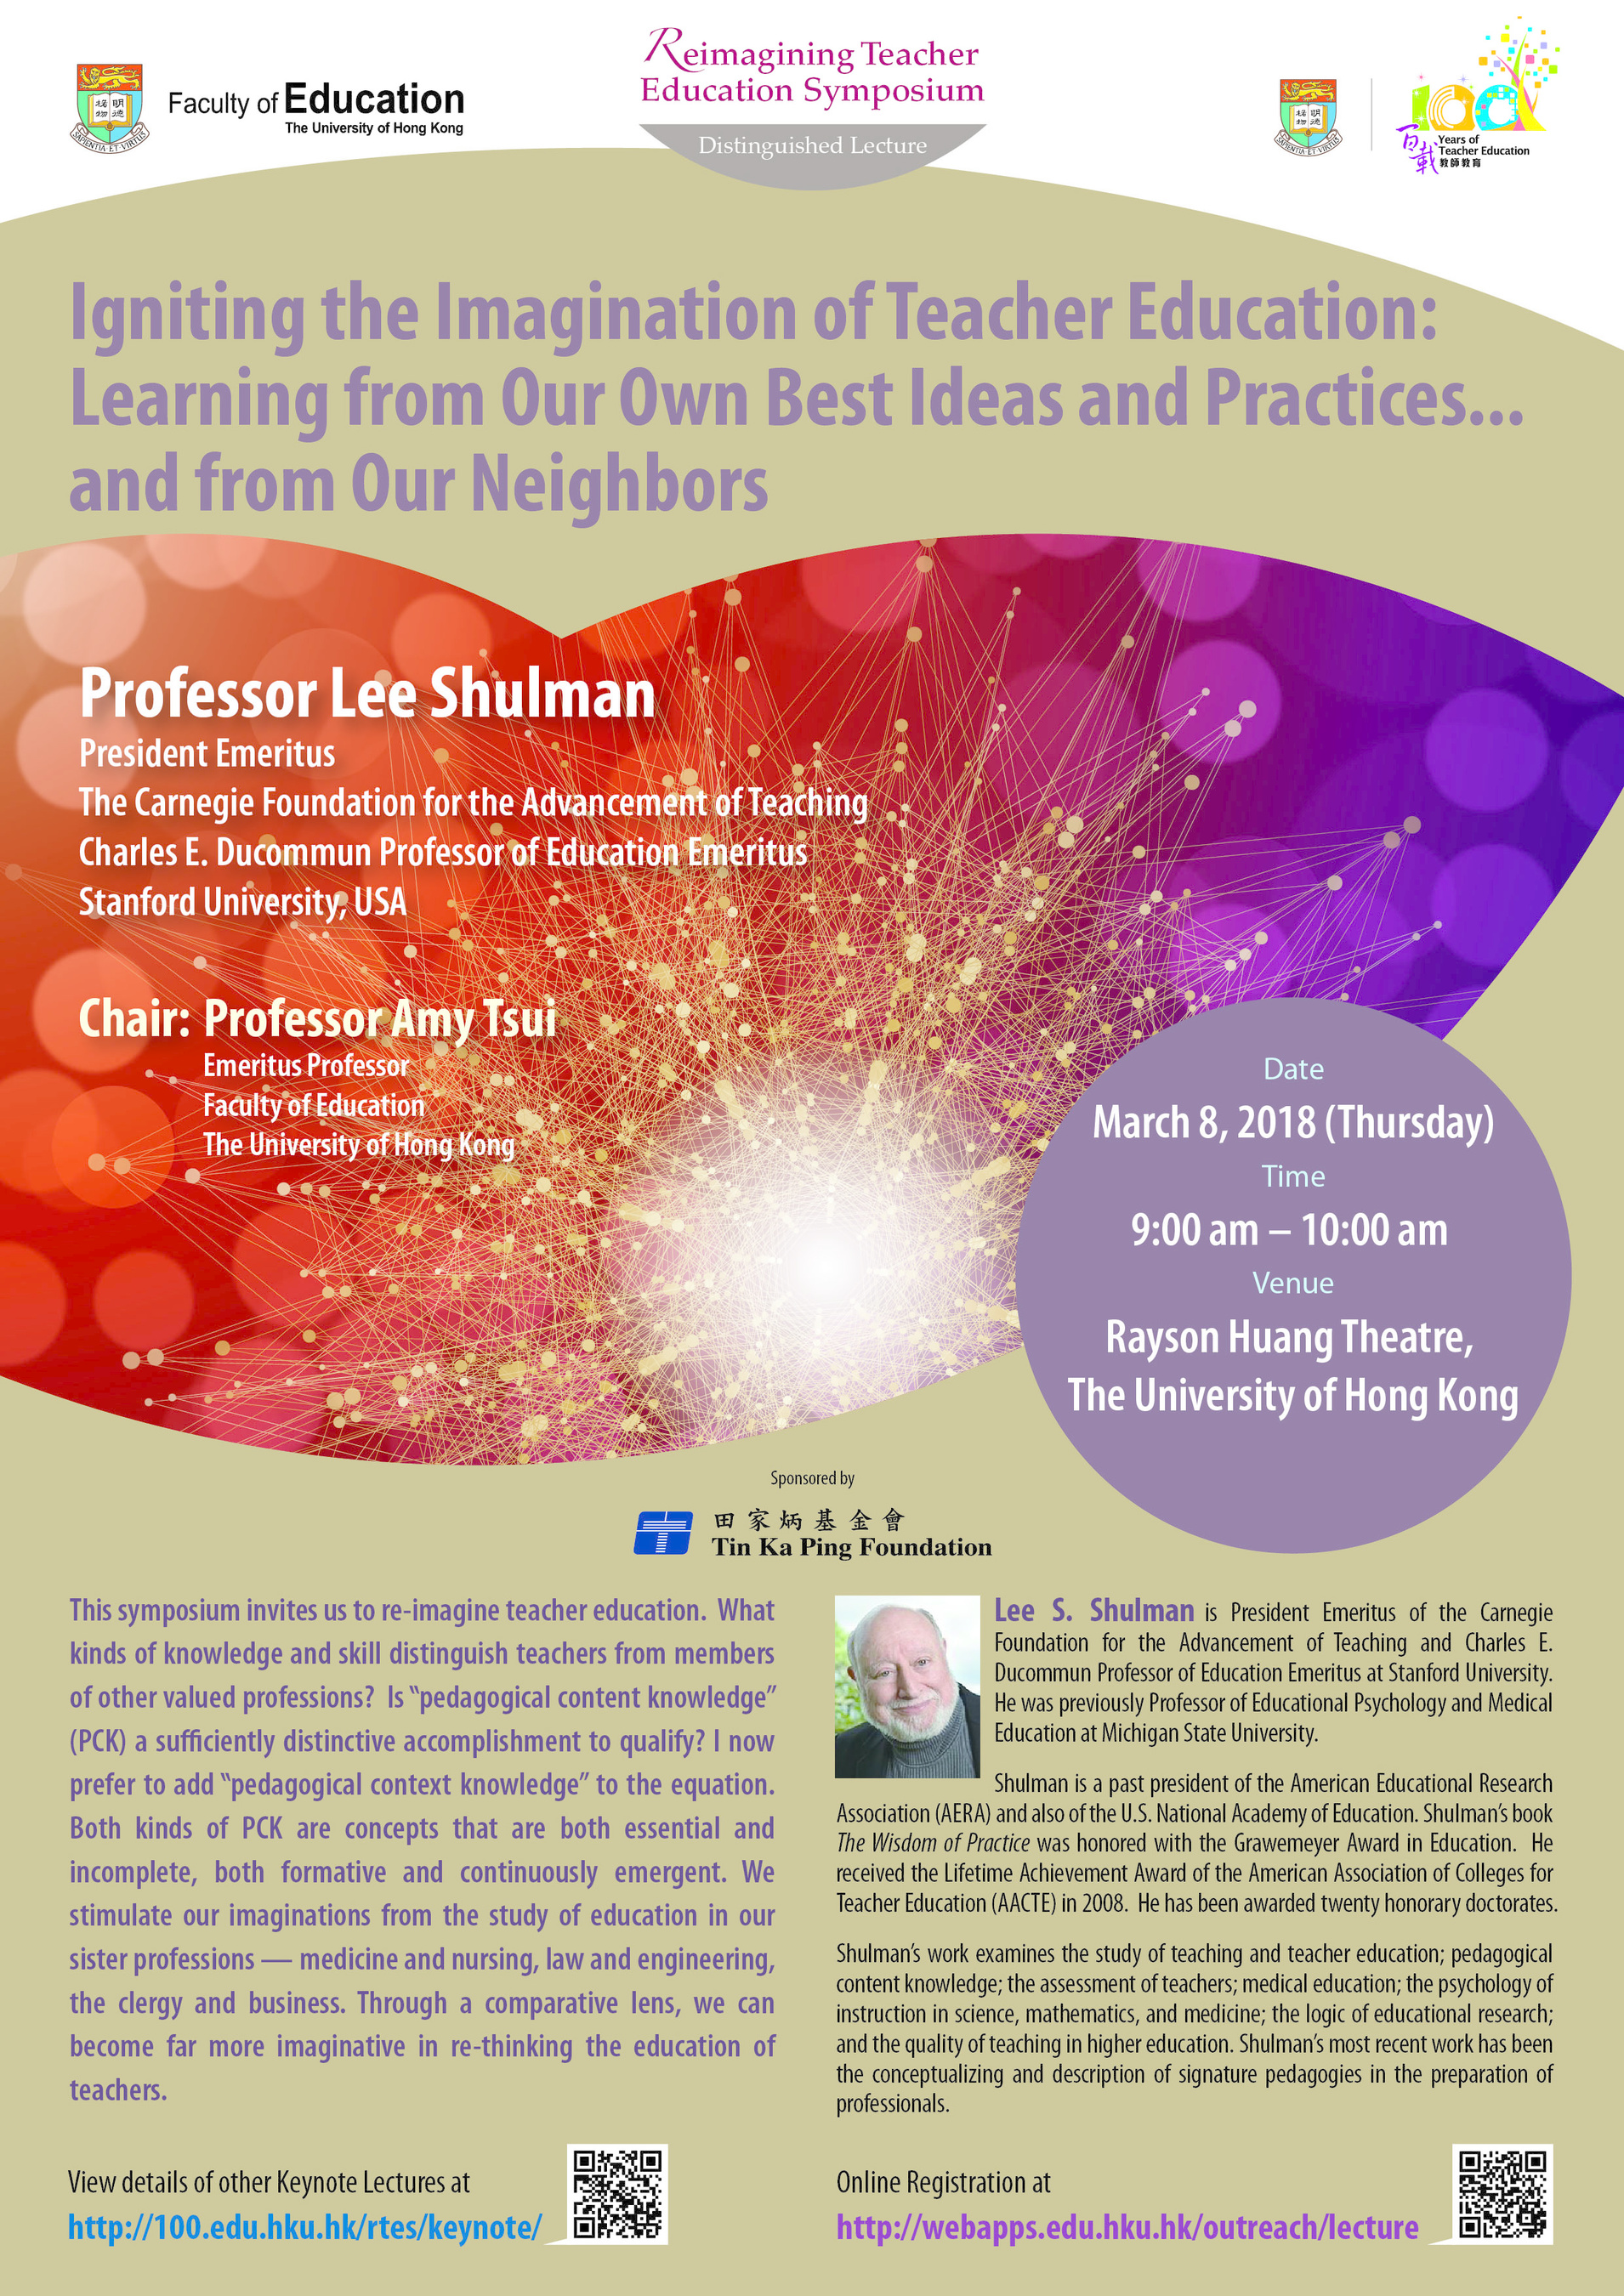 Igniting the imagination of teacher education: Learning from our own best ideas and practices... and from our neighbors